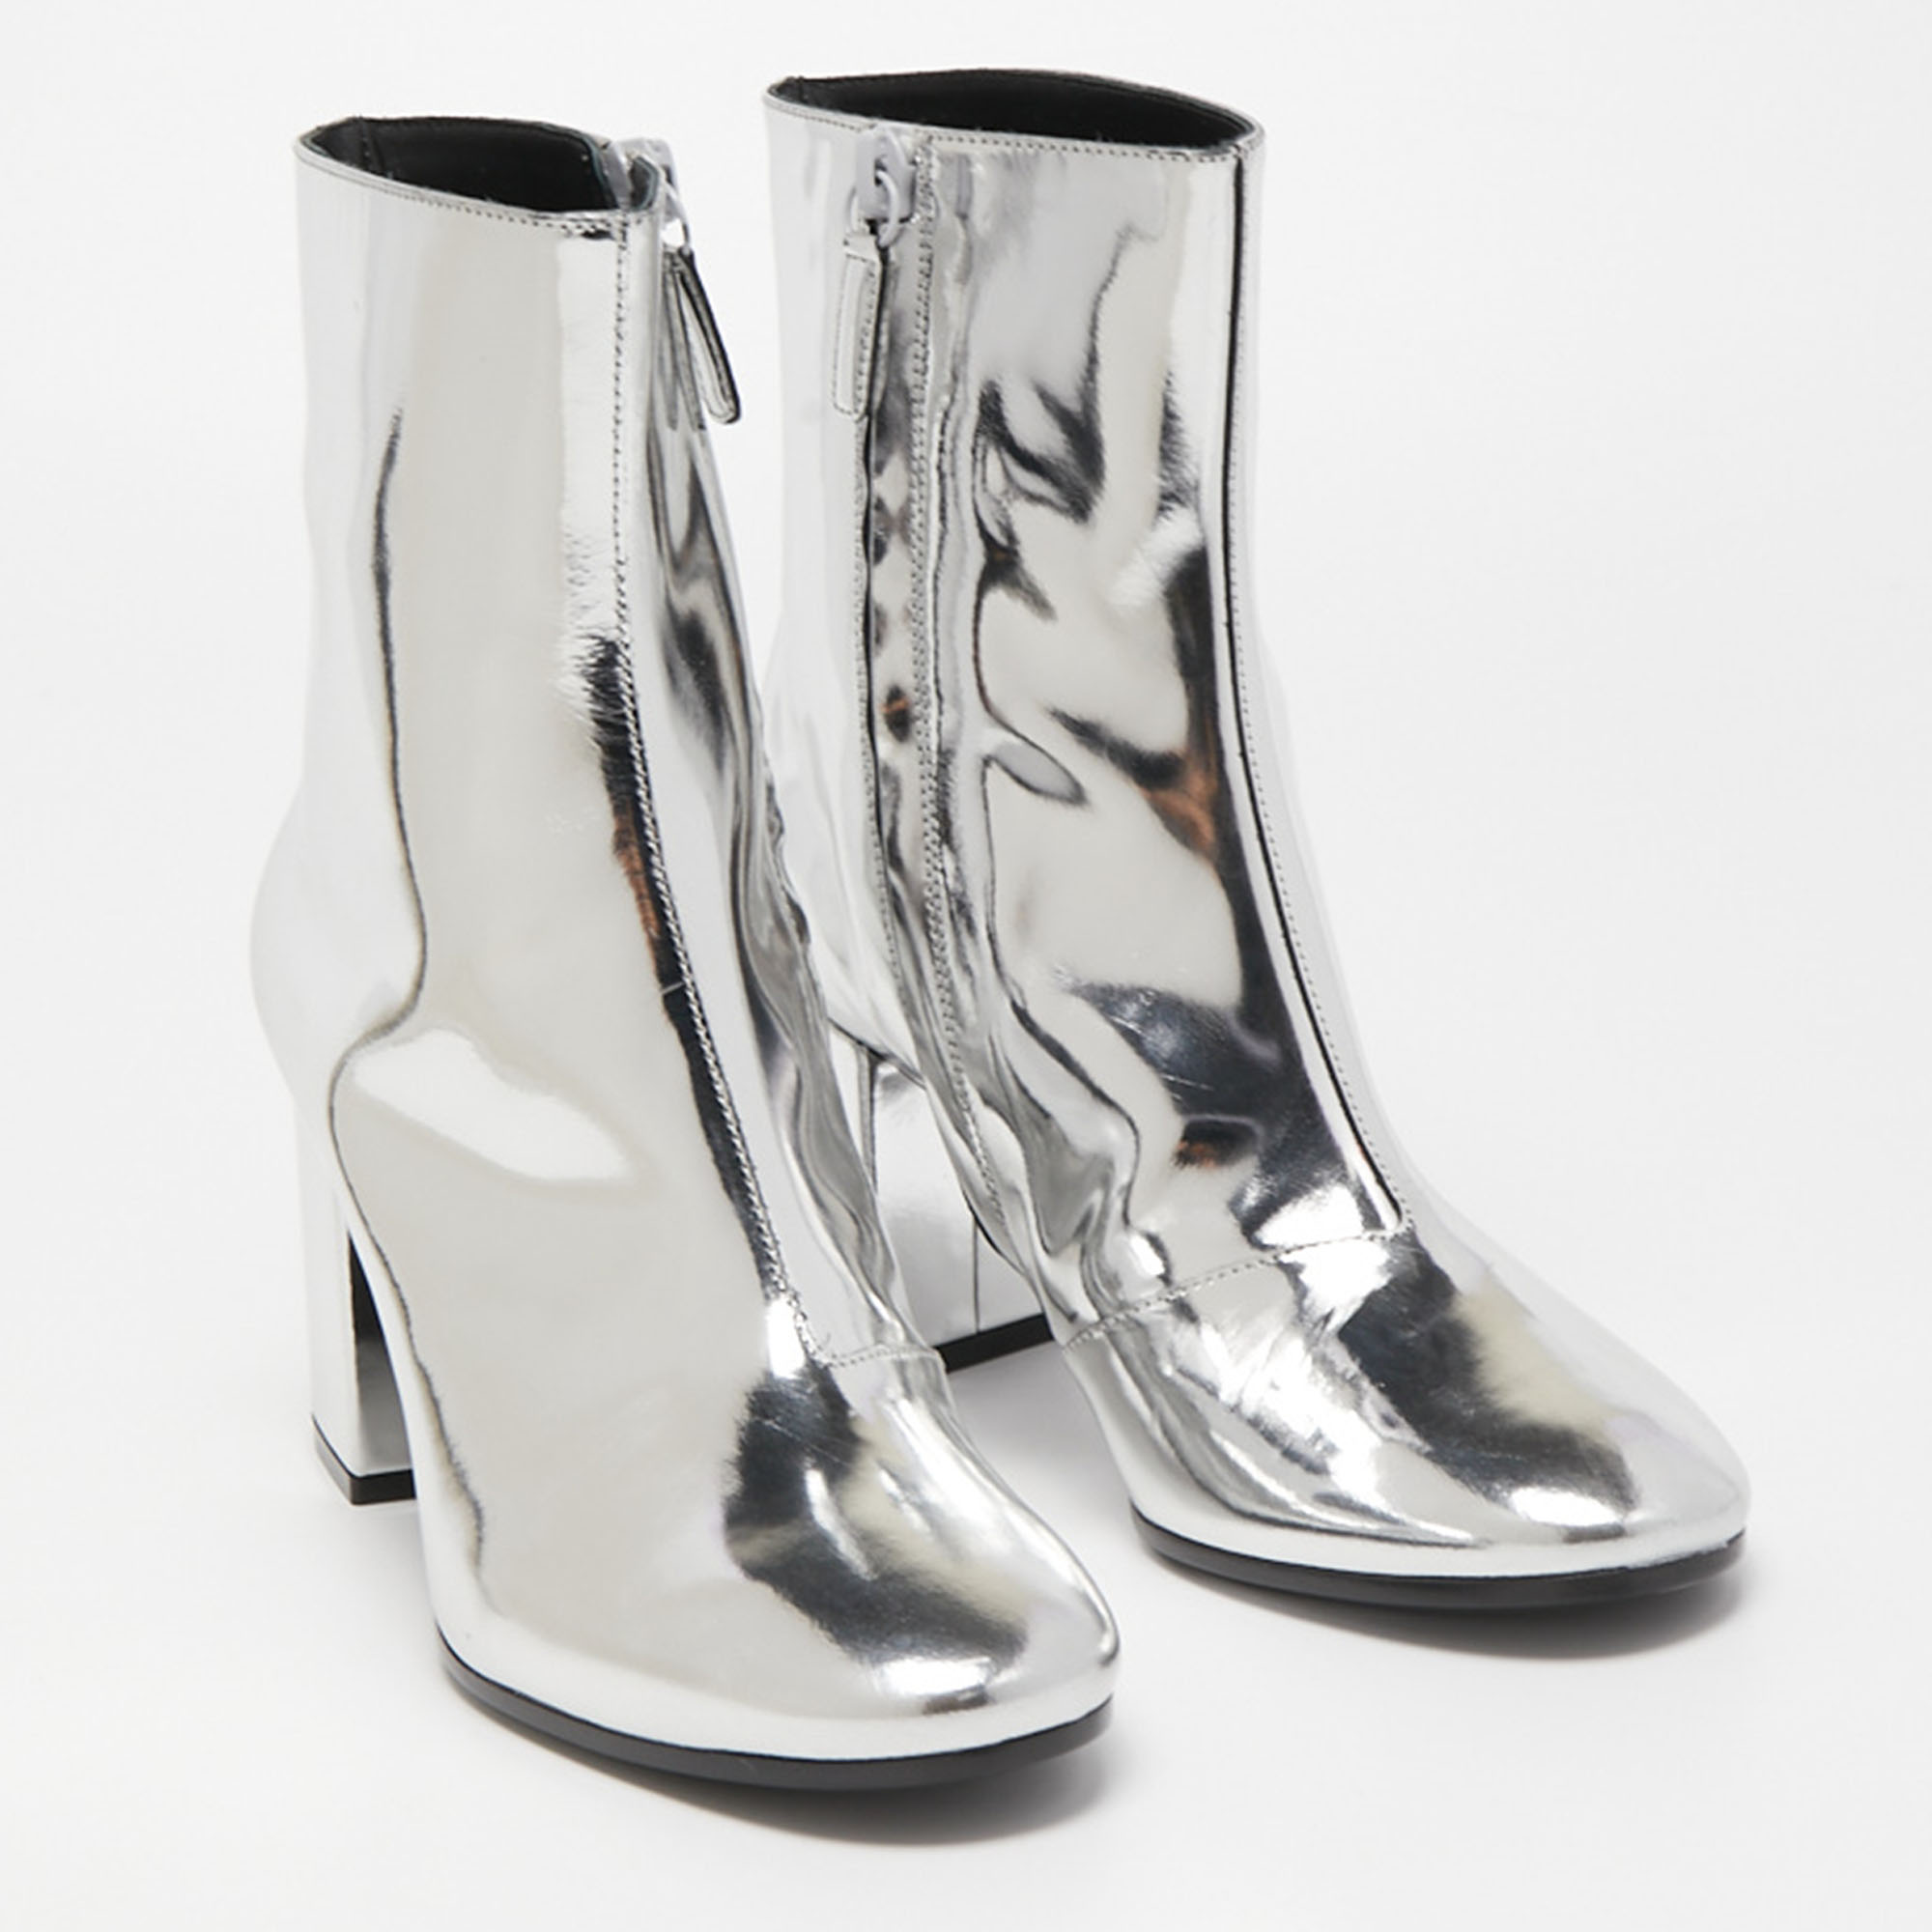 Balenciaga Silver Foil Leather Block Heel Ankle Boots Size 36